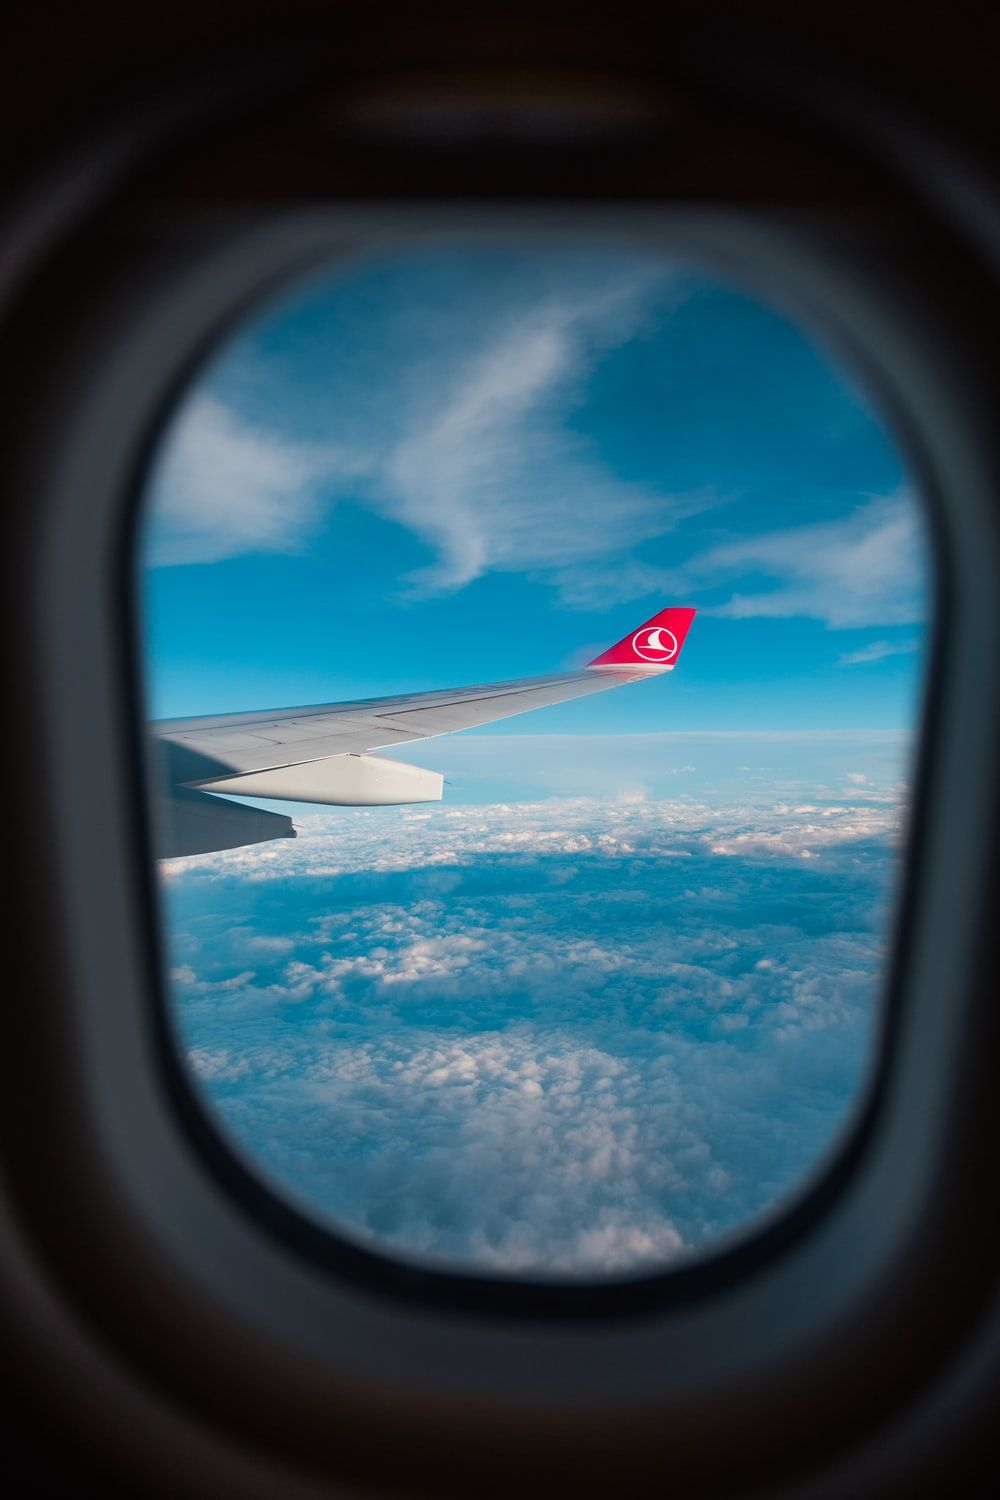 Turkish Airline Picture. Download Free Image